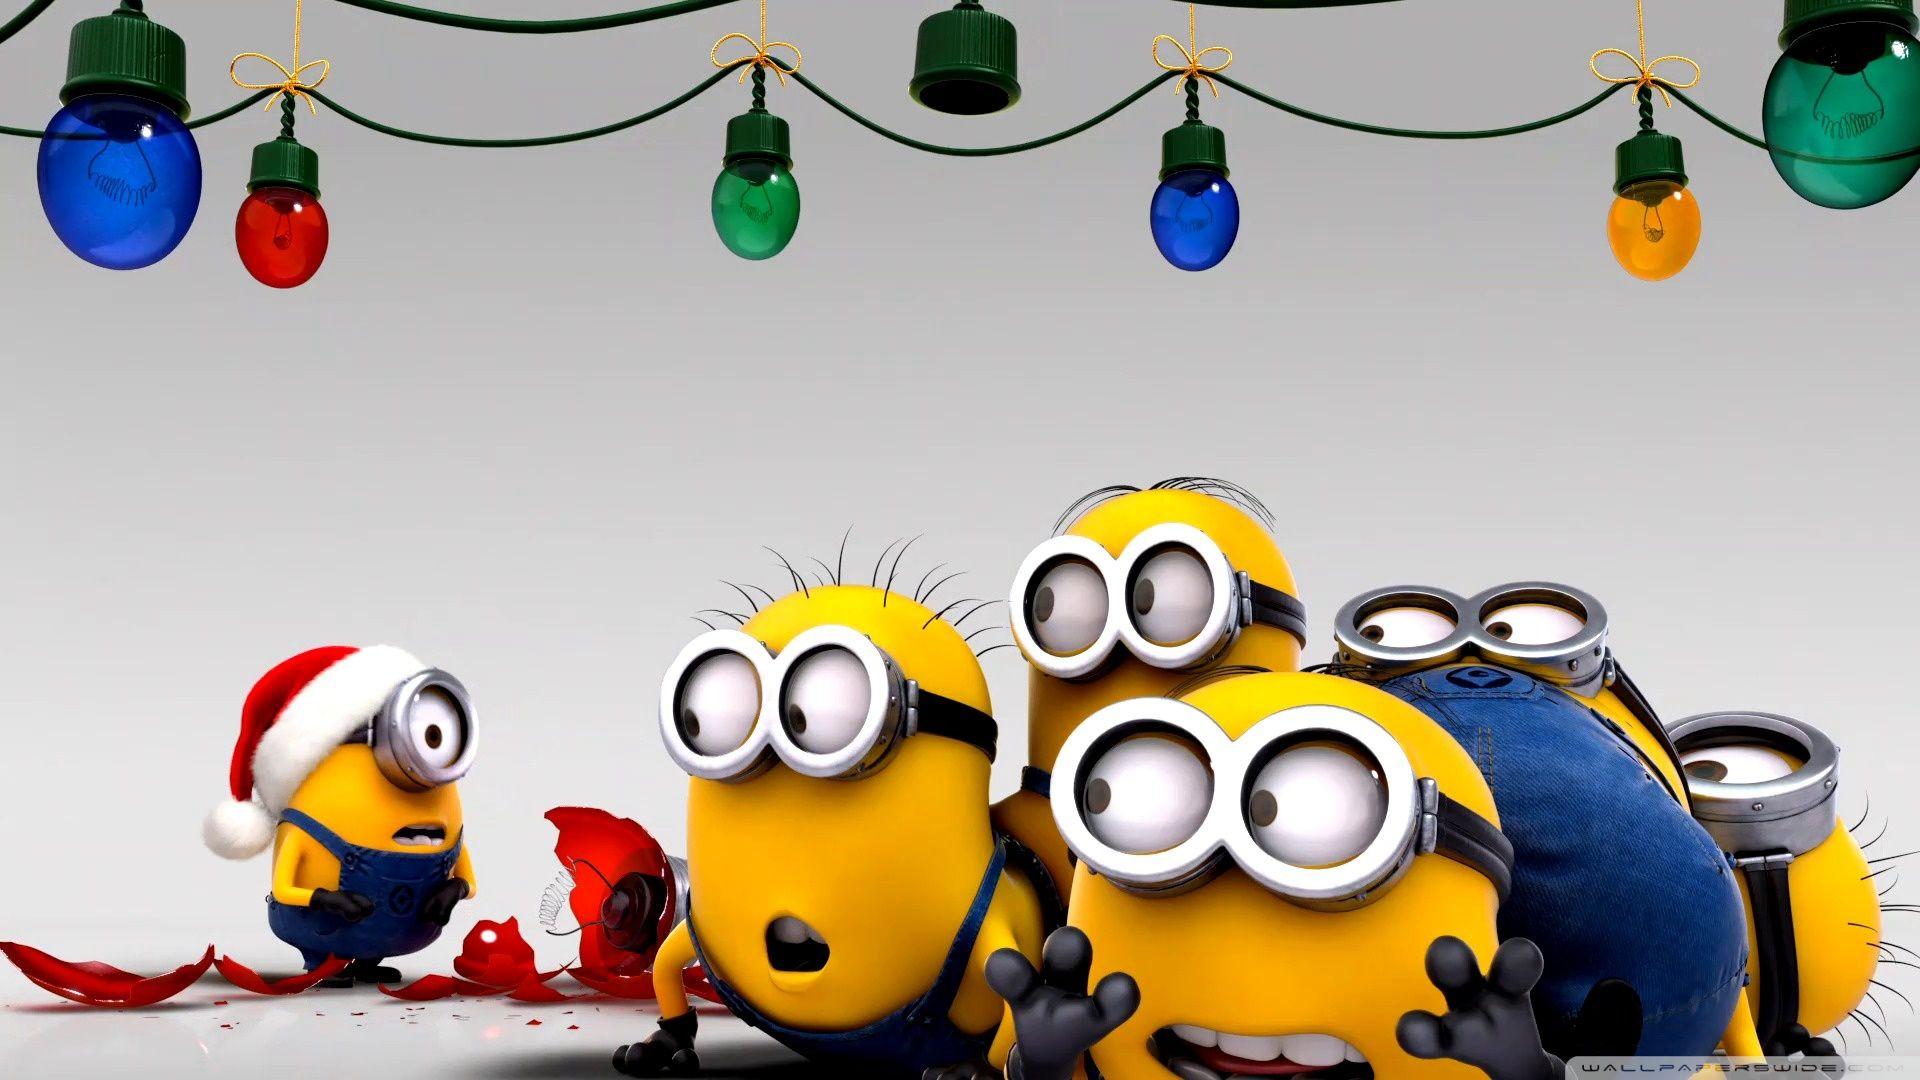 Minions Christmas Wallpapers  Wallpaper Cave  Minion christmas Merry christmas  minions Christmas wallpaper